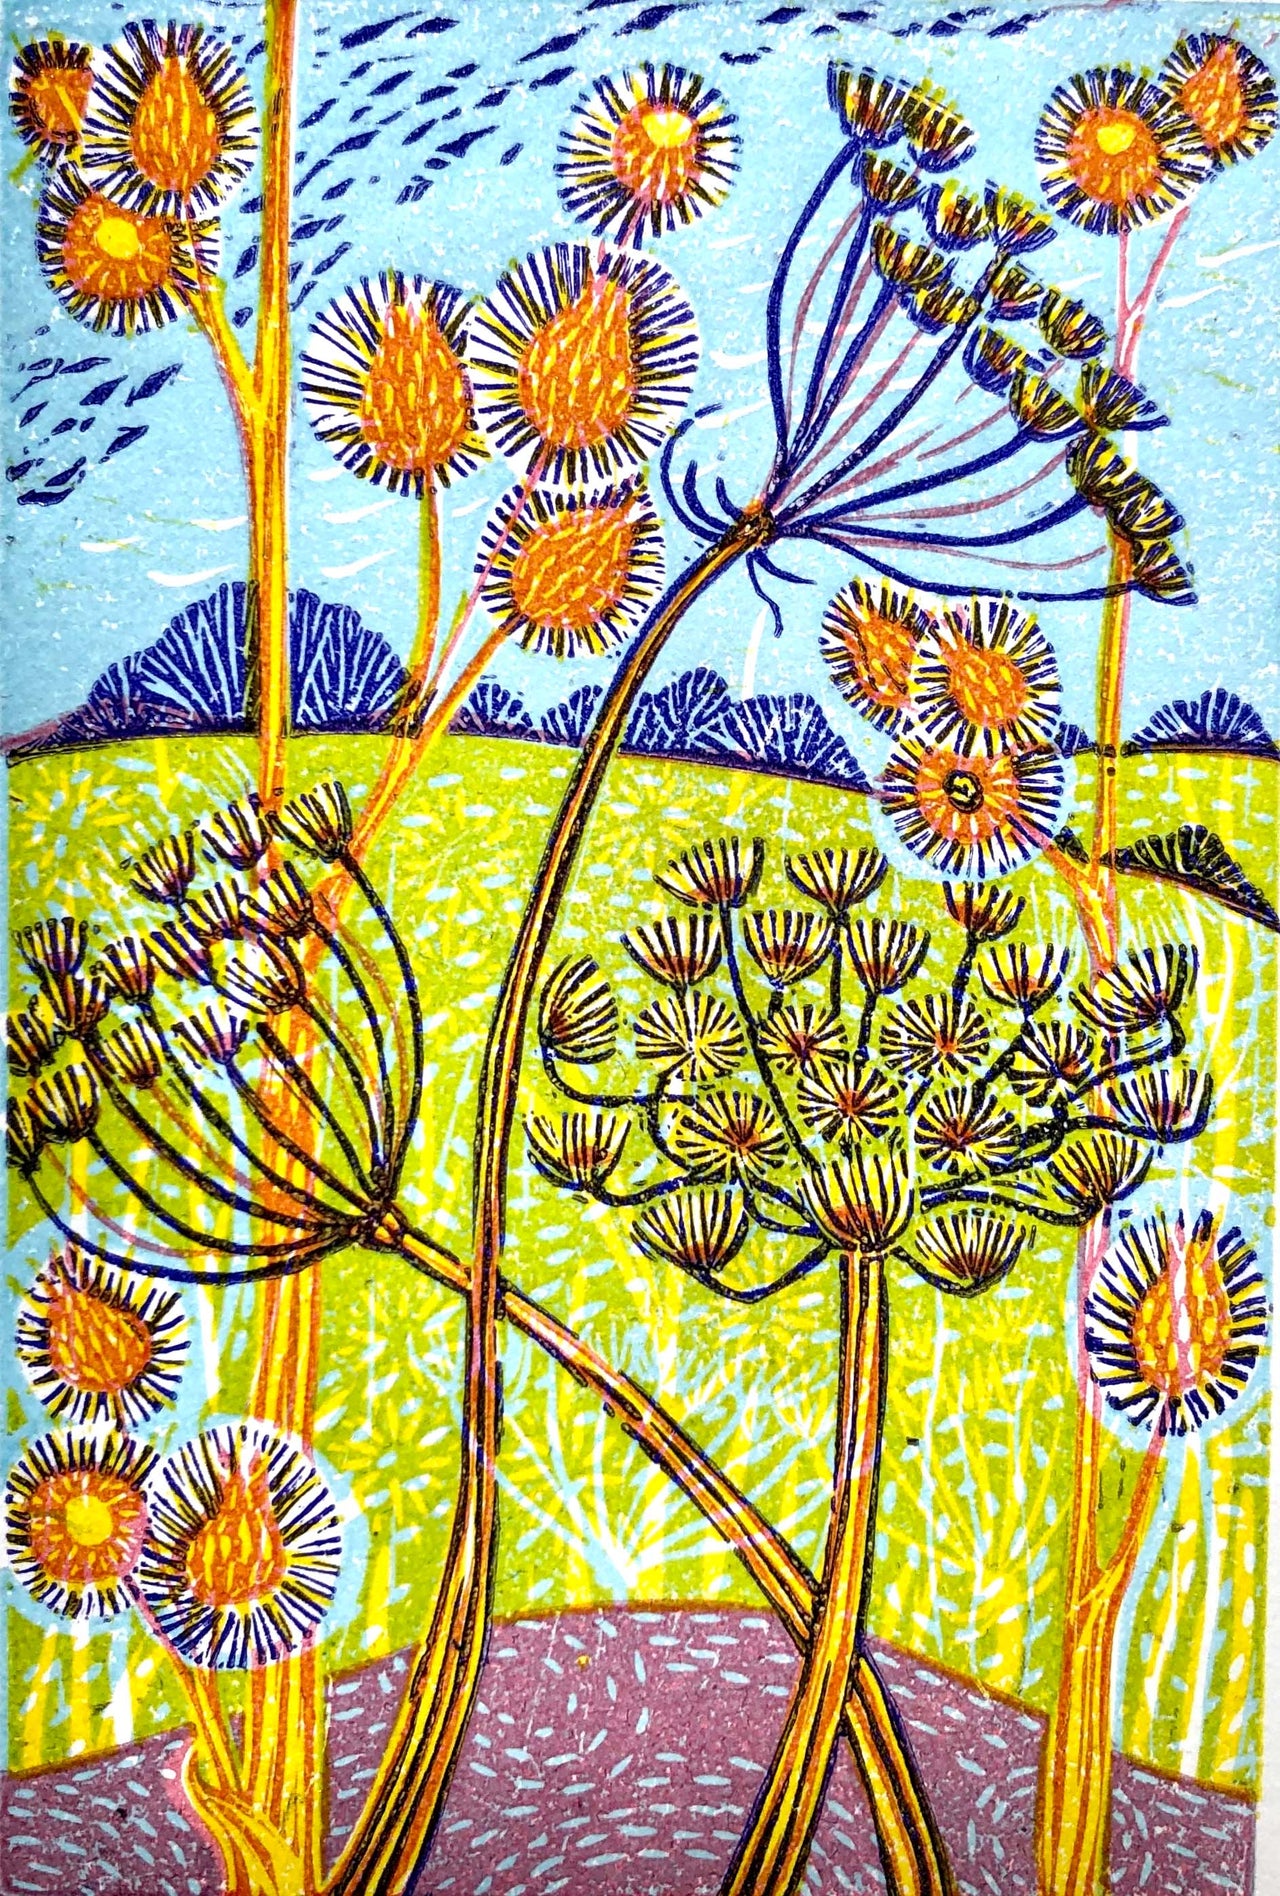 Limited edition lino print by print artist Claire Armitage